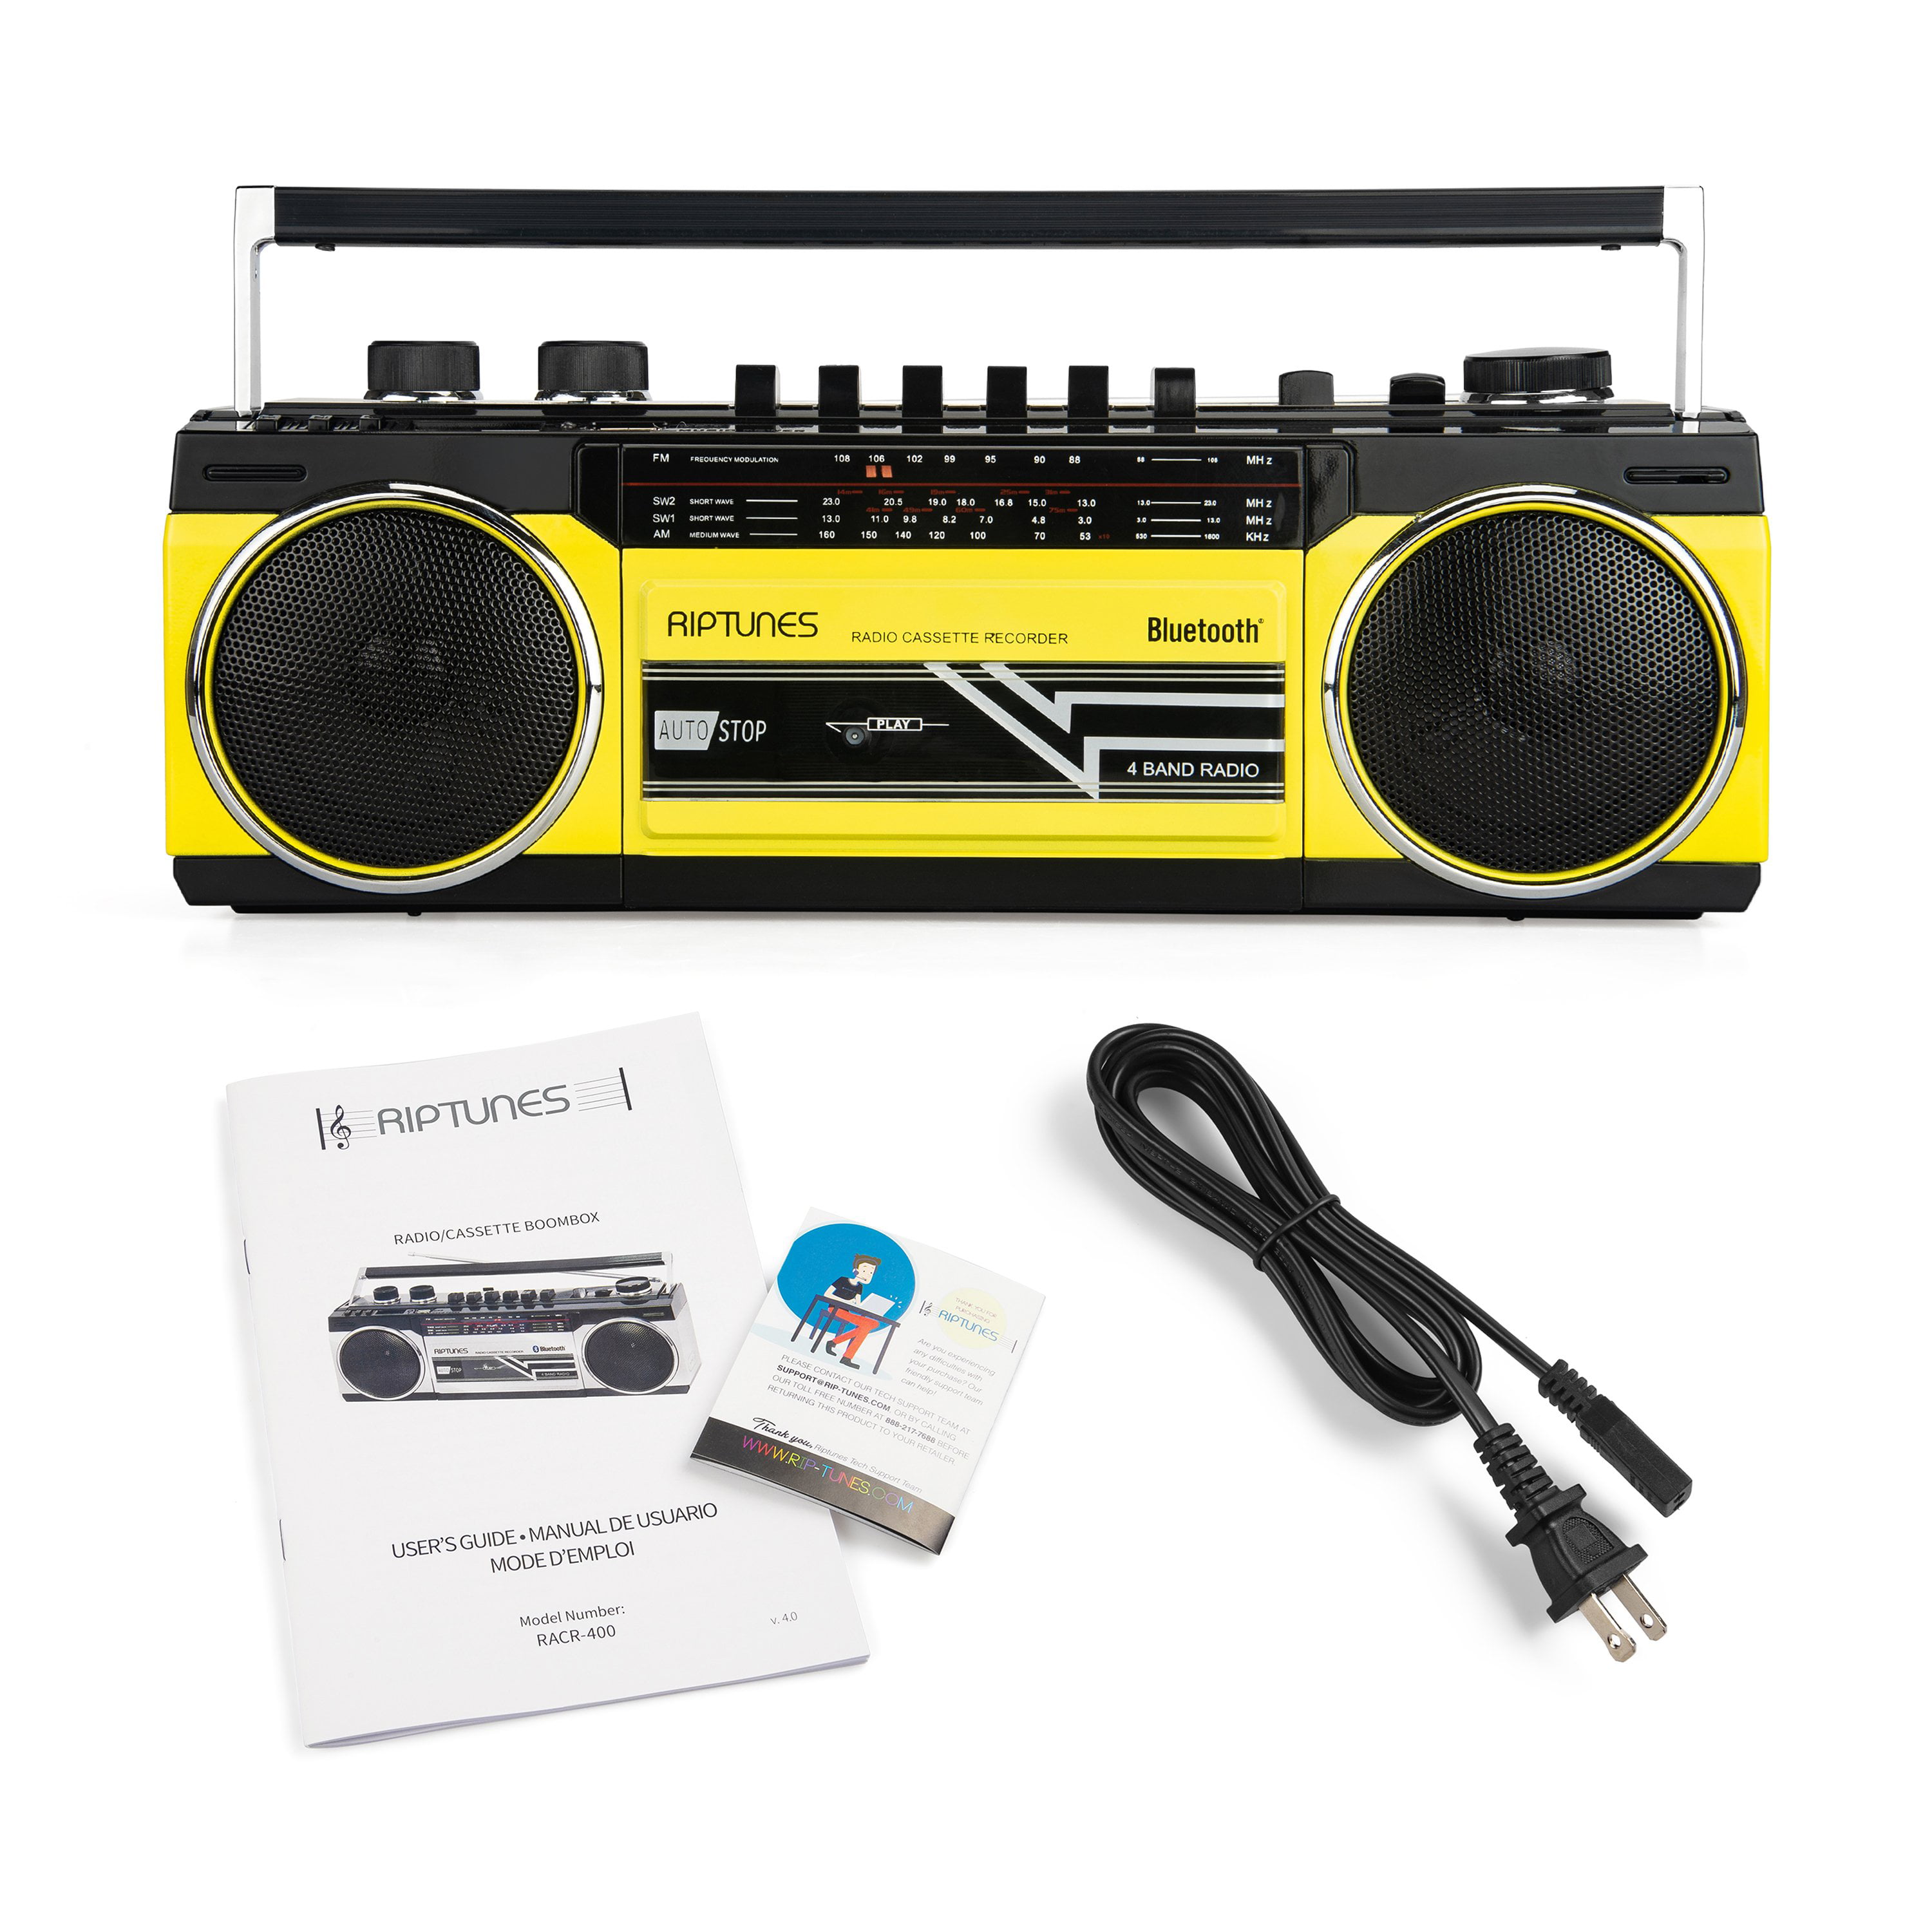 Recorder, Blueooth Riptunes Band Retro Radio Boombox Cassette Player Radio AM/FM/SW1/SW2 with and